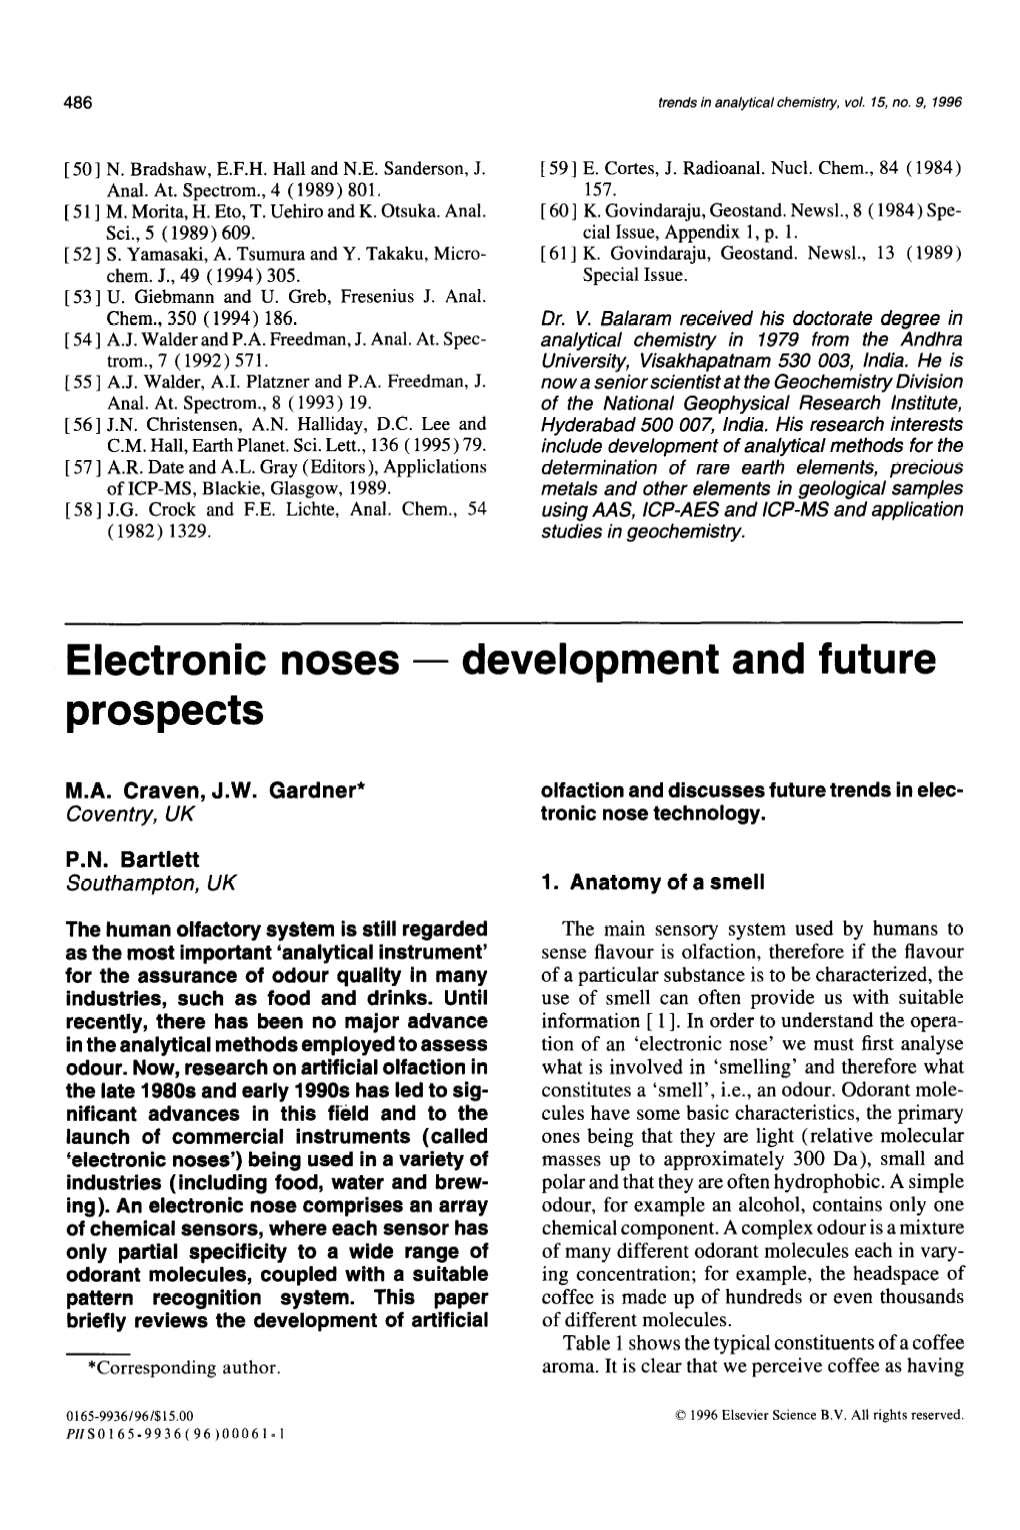 Electronic Noses - Development and Future Prospects